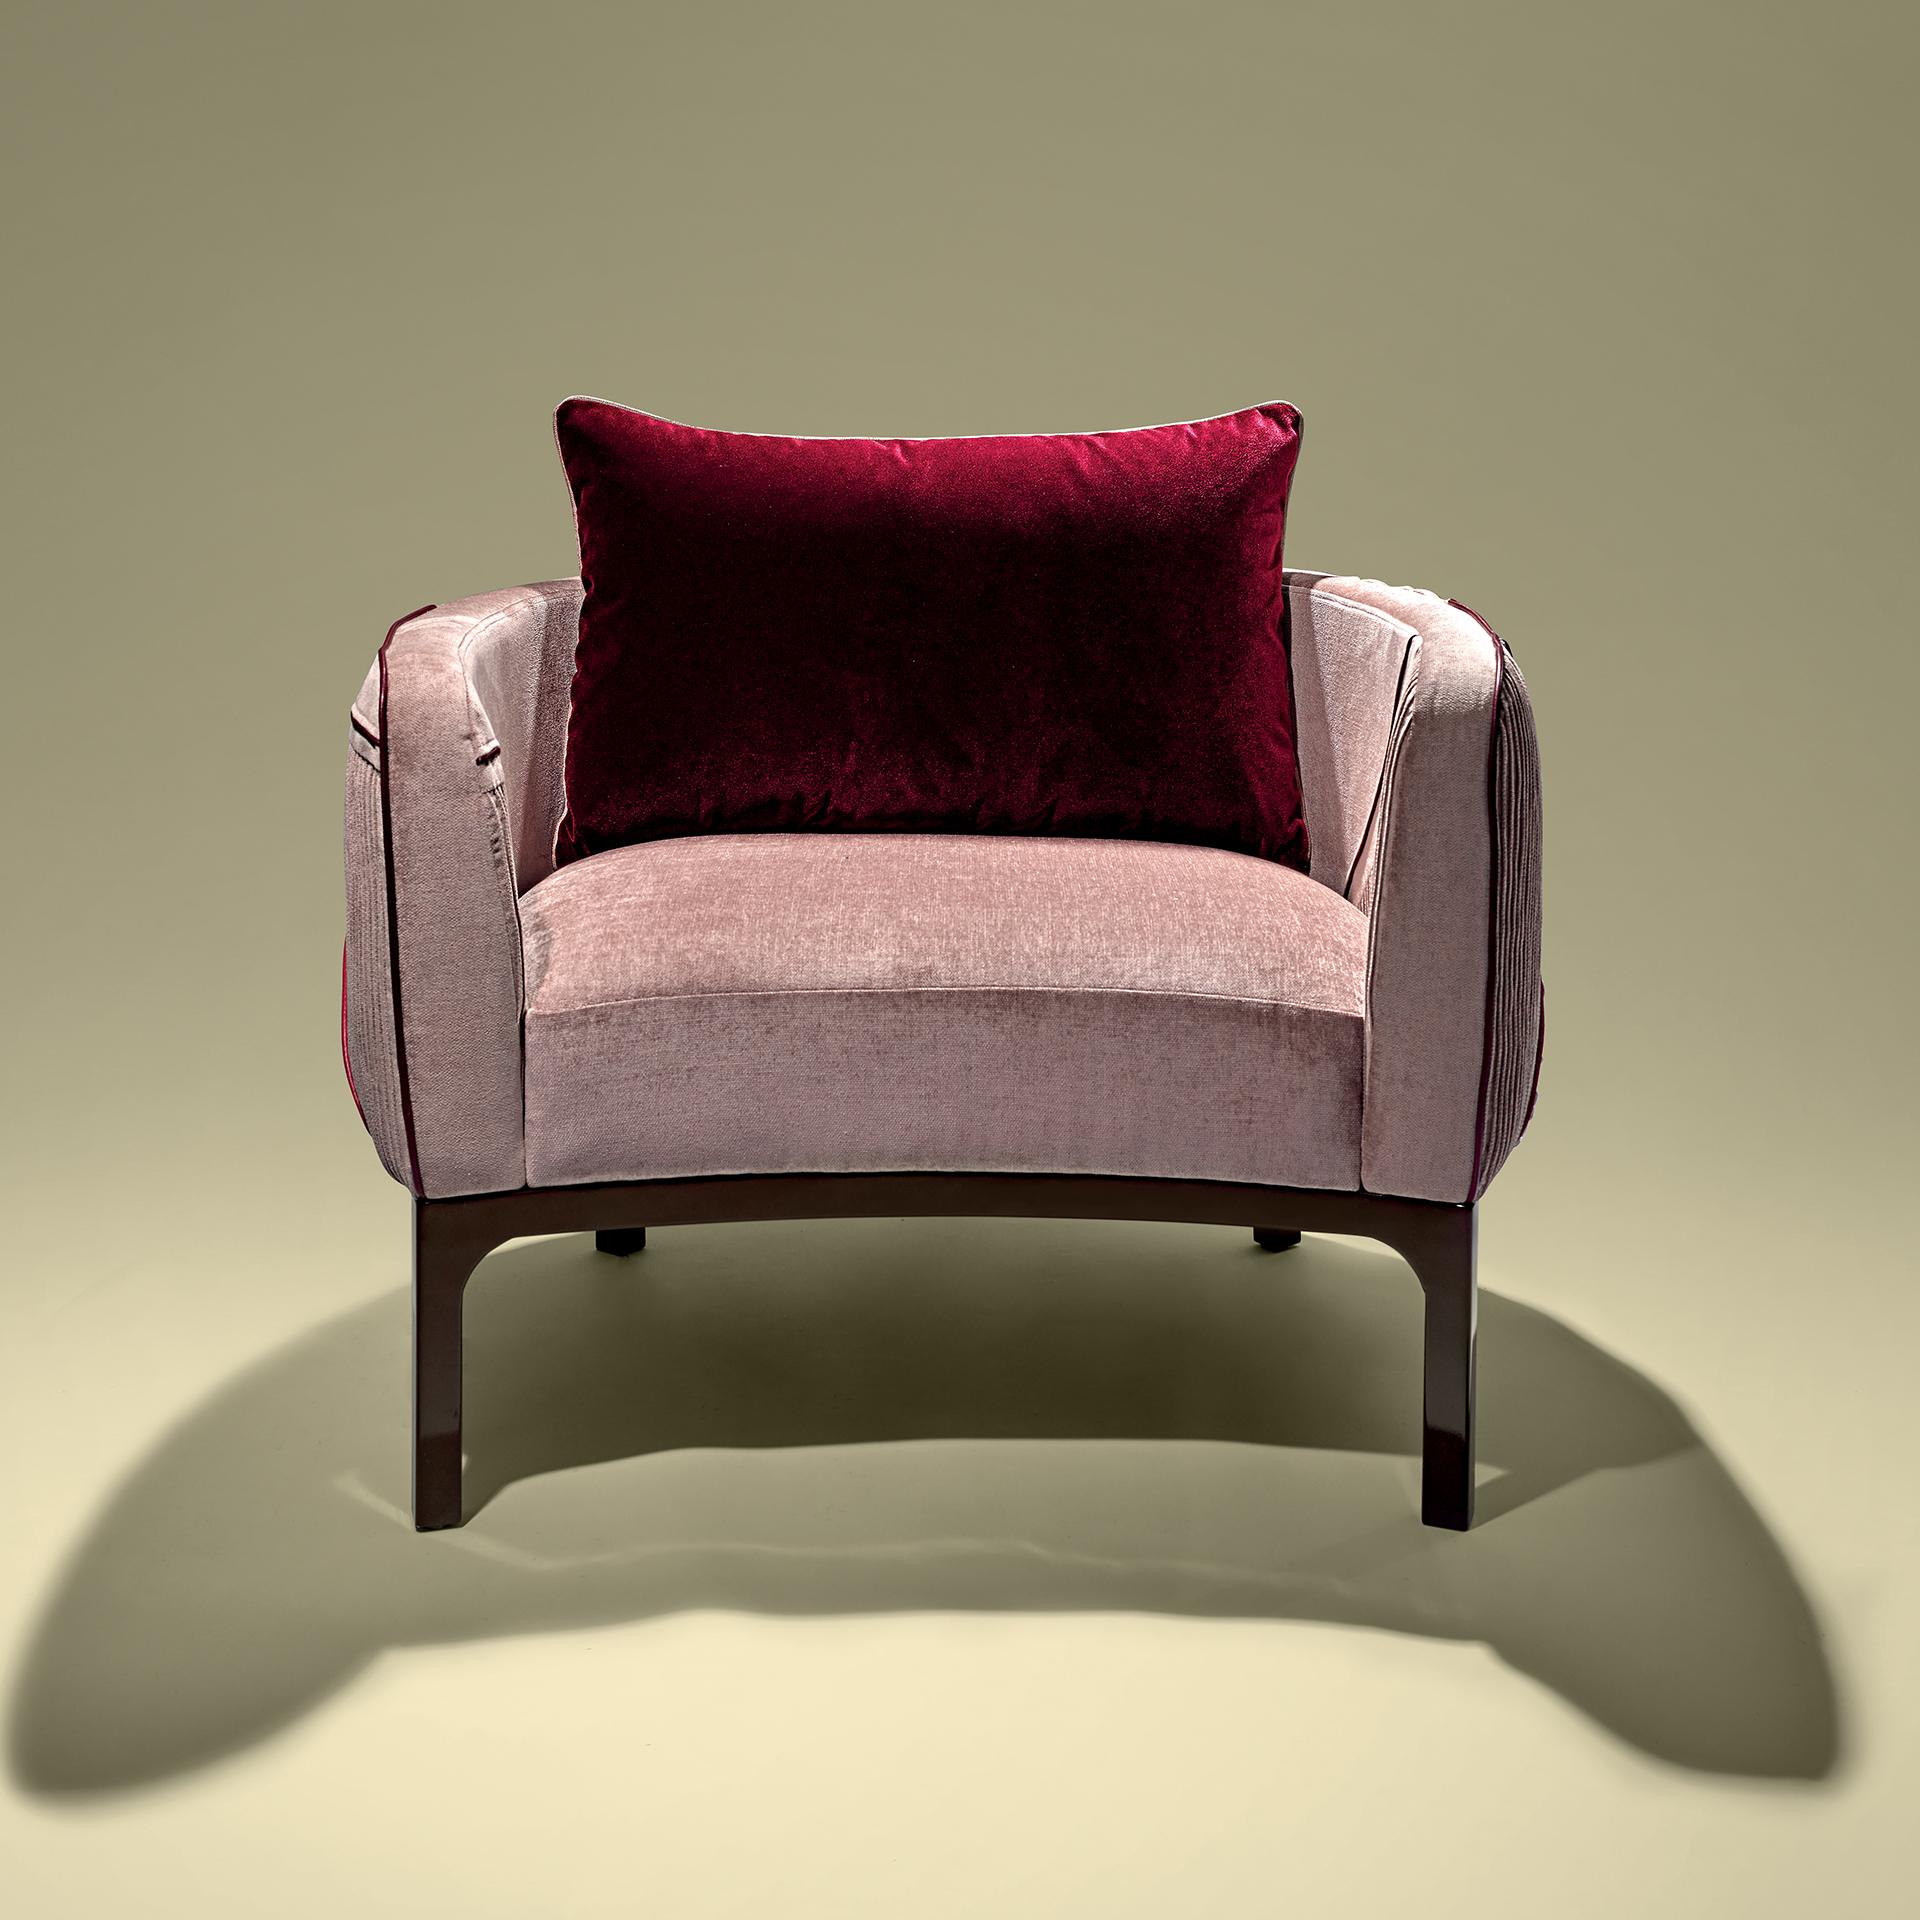 Romantic velvet armchair in pink velvet and leather
This piece takes 360 hours to produce, handcrafted armchair with artistic intervention by Juliana Ribeiro.

Bespoke / Customizable
Identical shapes with different sizes and finishings.
All RAL